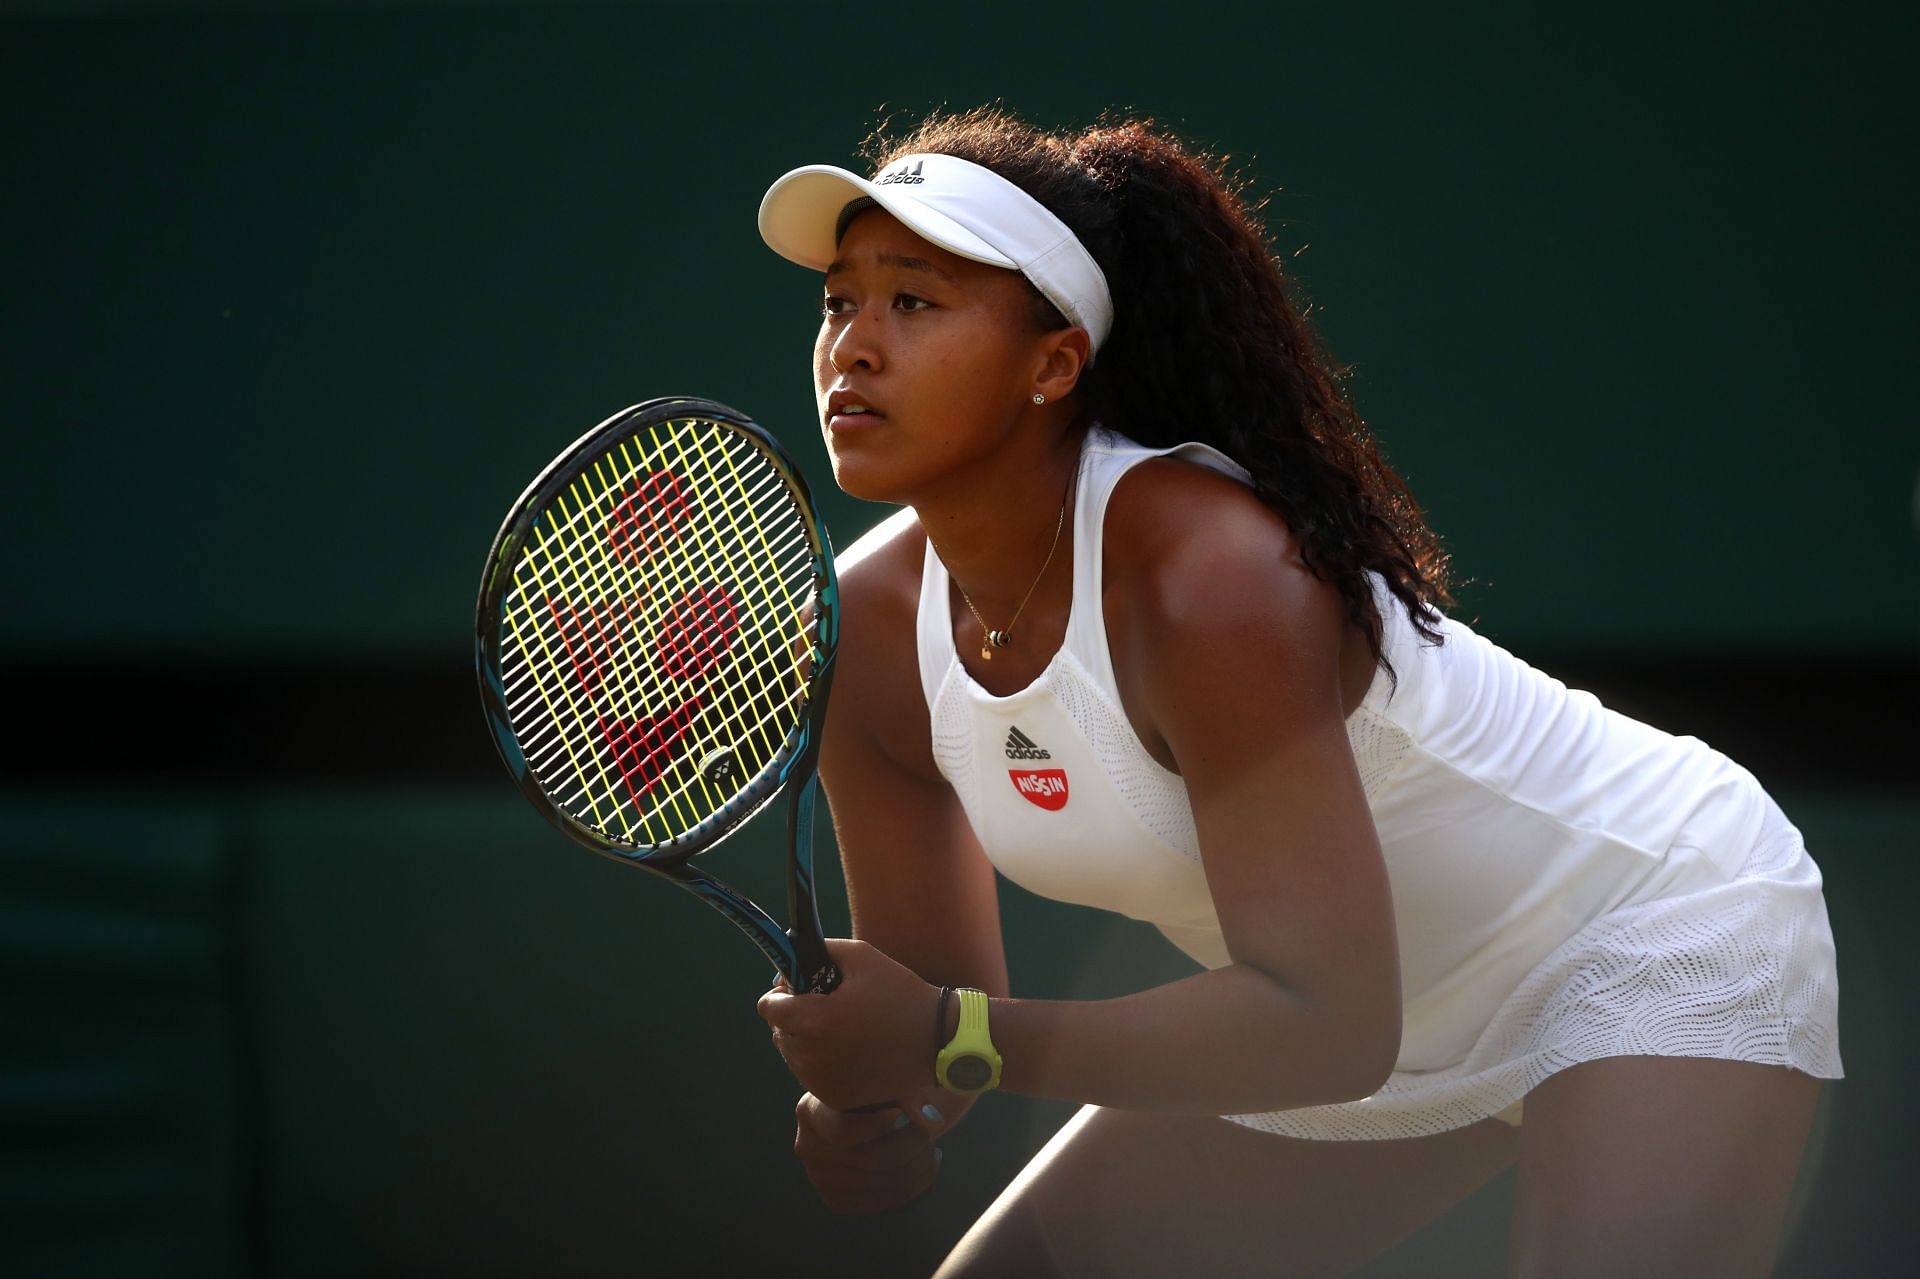 Naomi Osaka is not too thrilled about the idea of making the trip to the UK